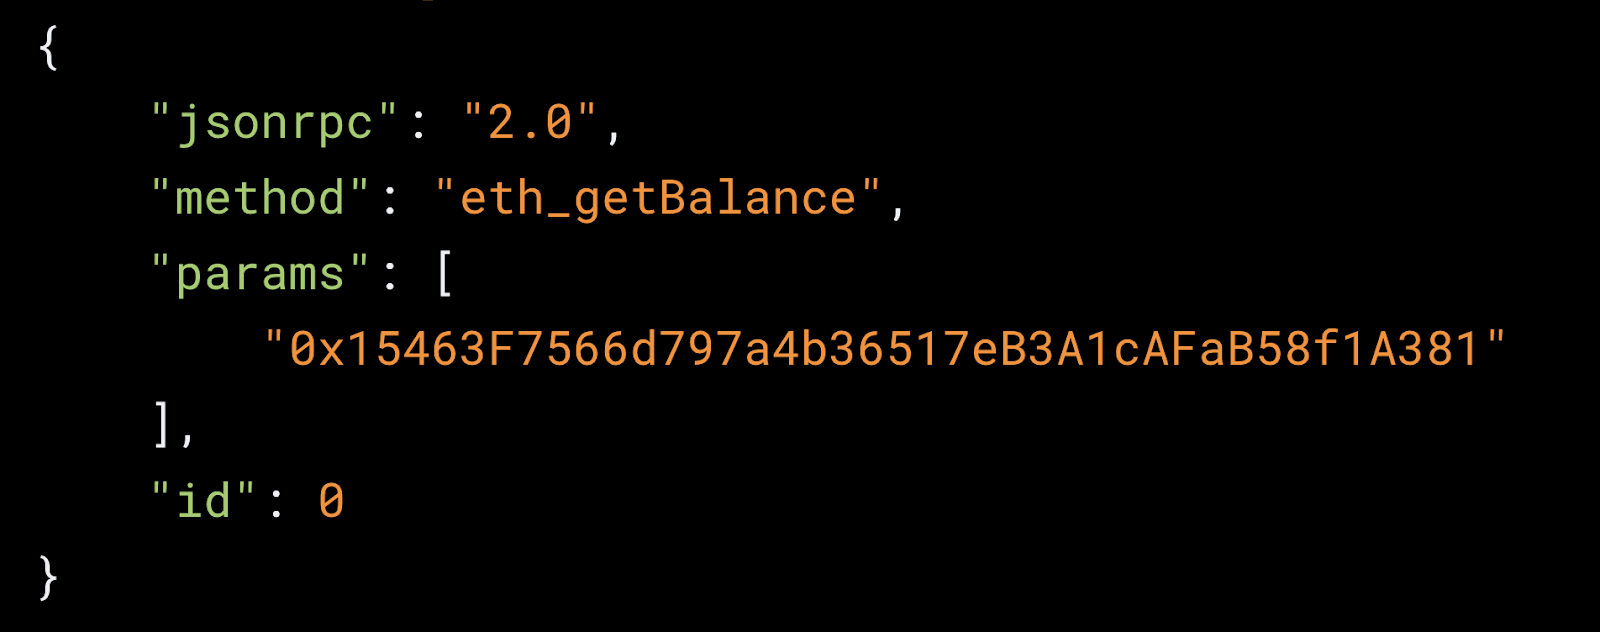 To query a node for a balance of an account, you would send the following JSON object to the node